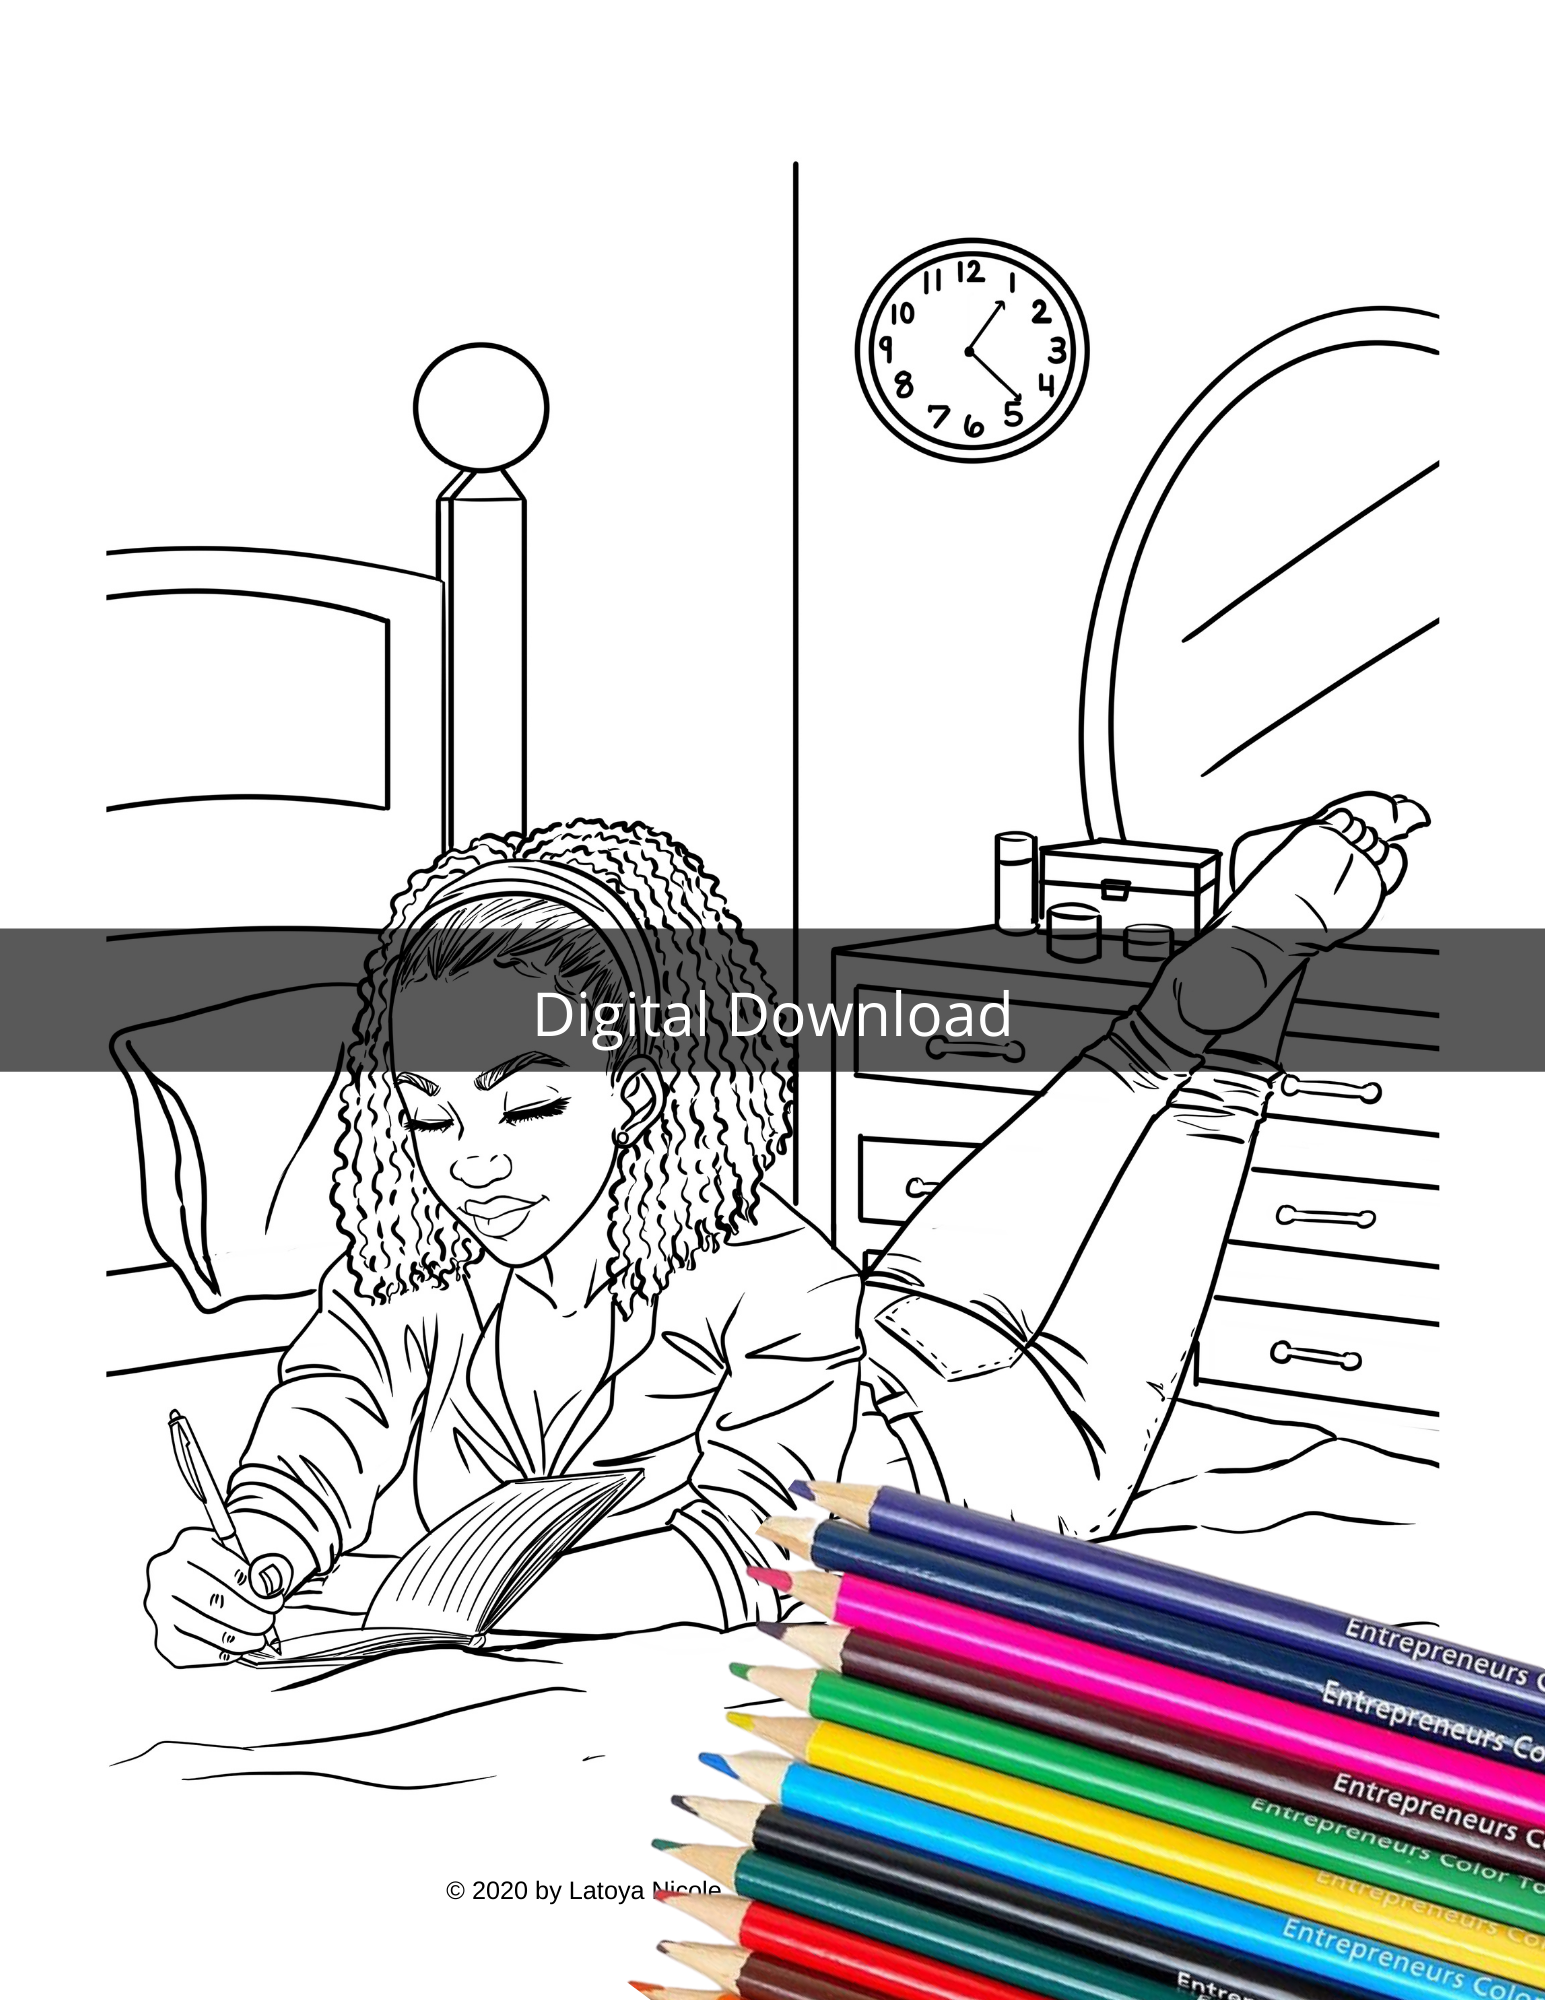 caring coloring pages